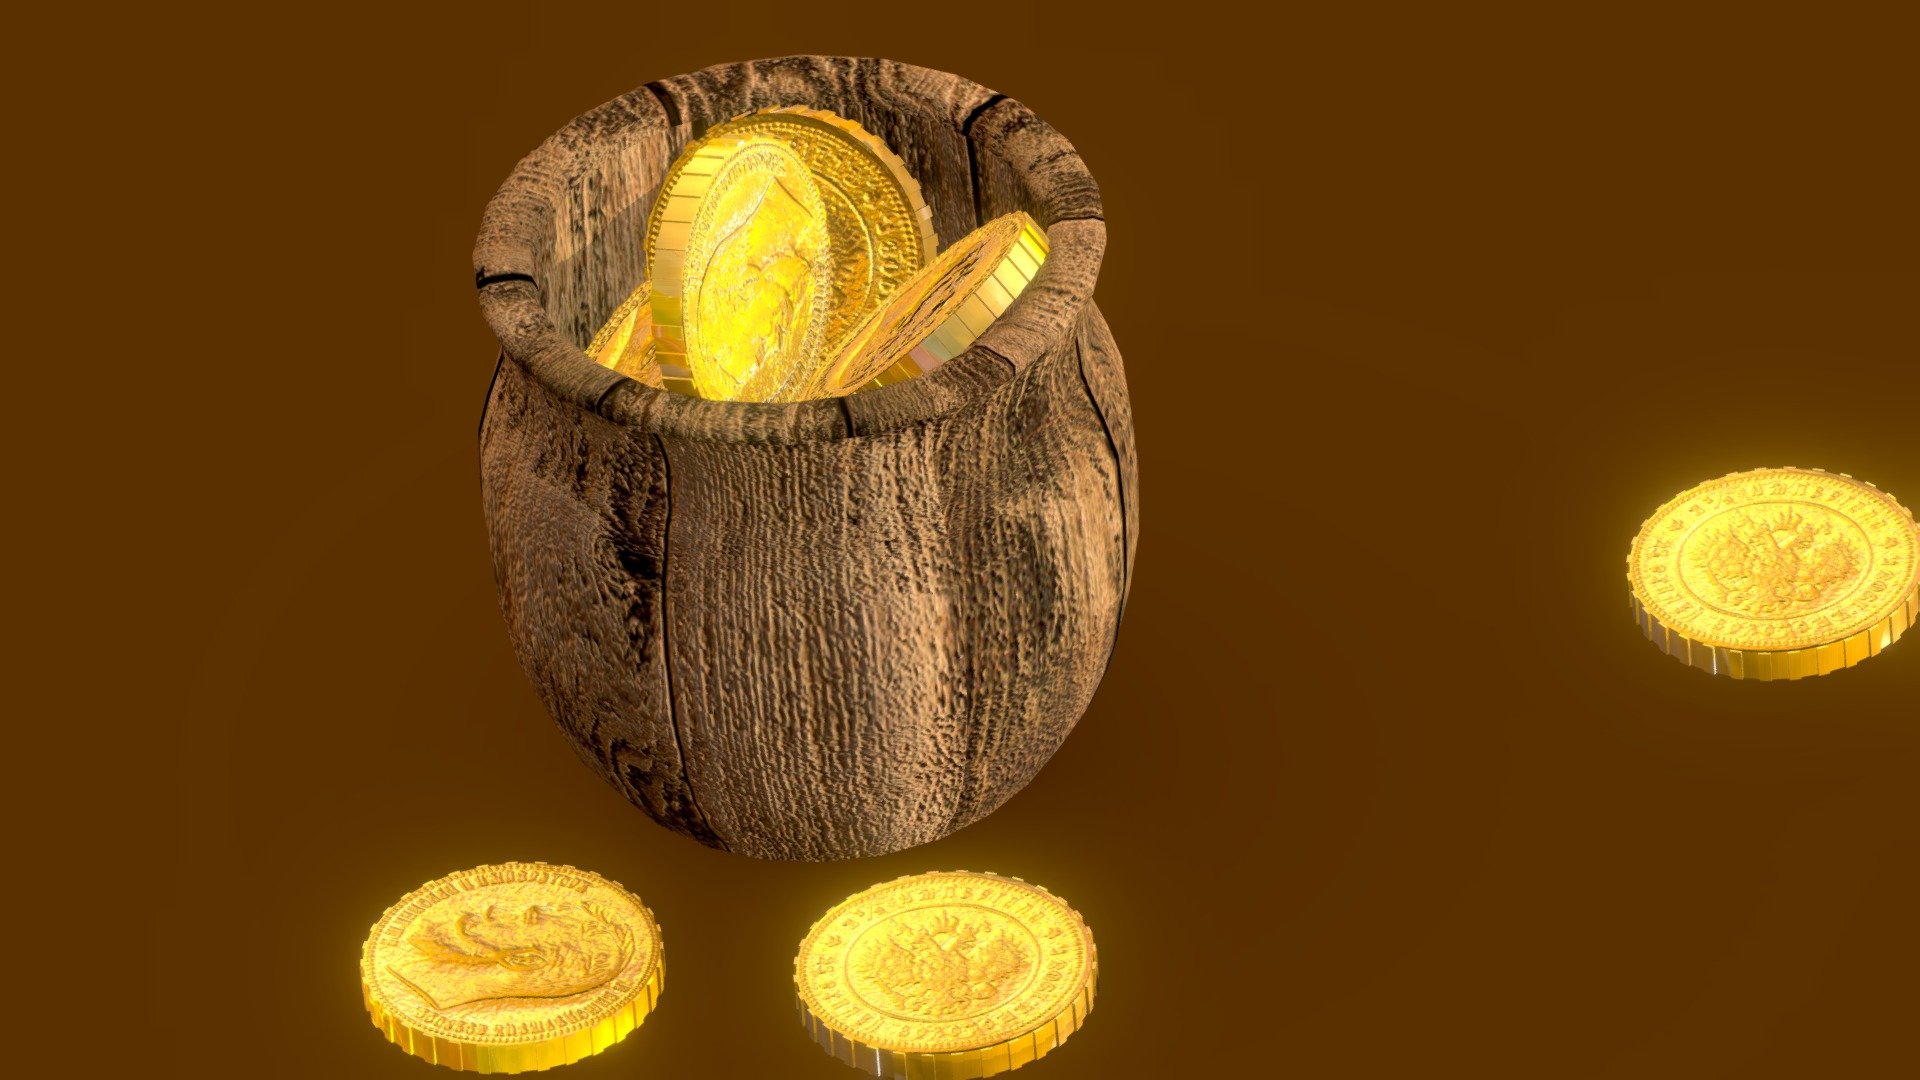 Wooden jug with old coins